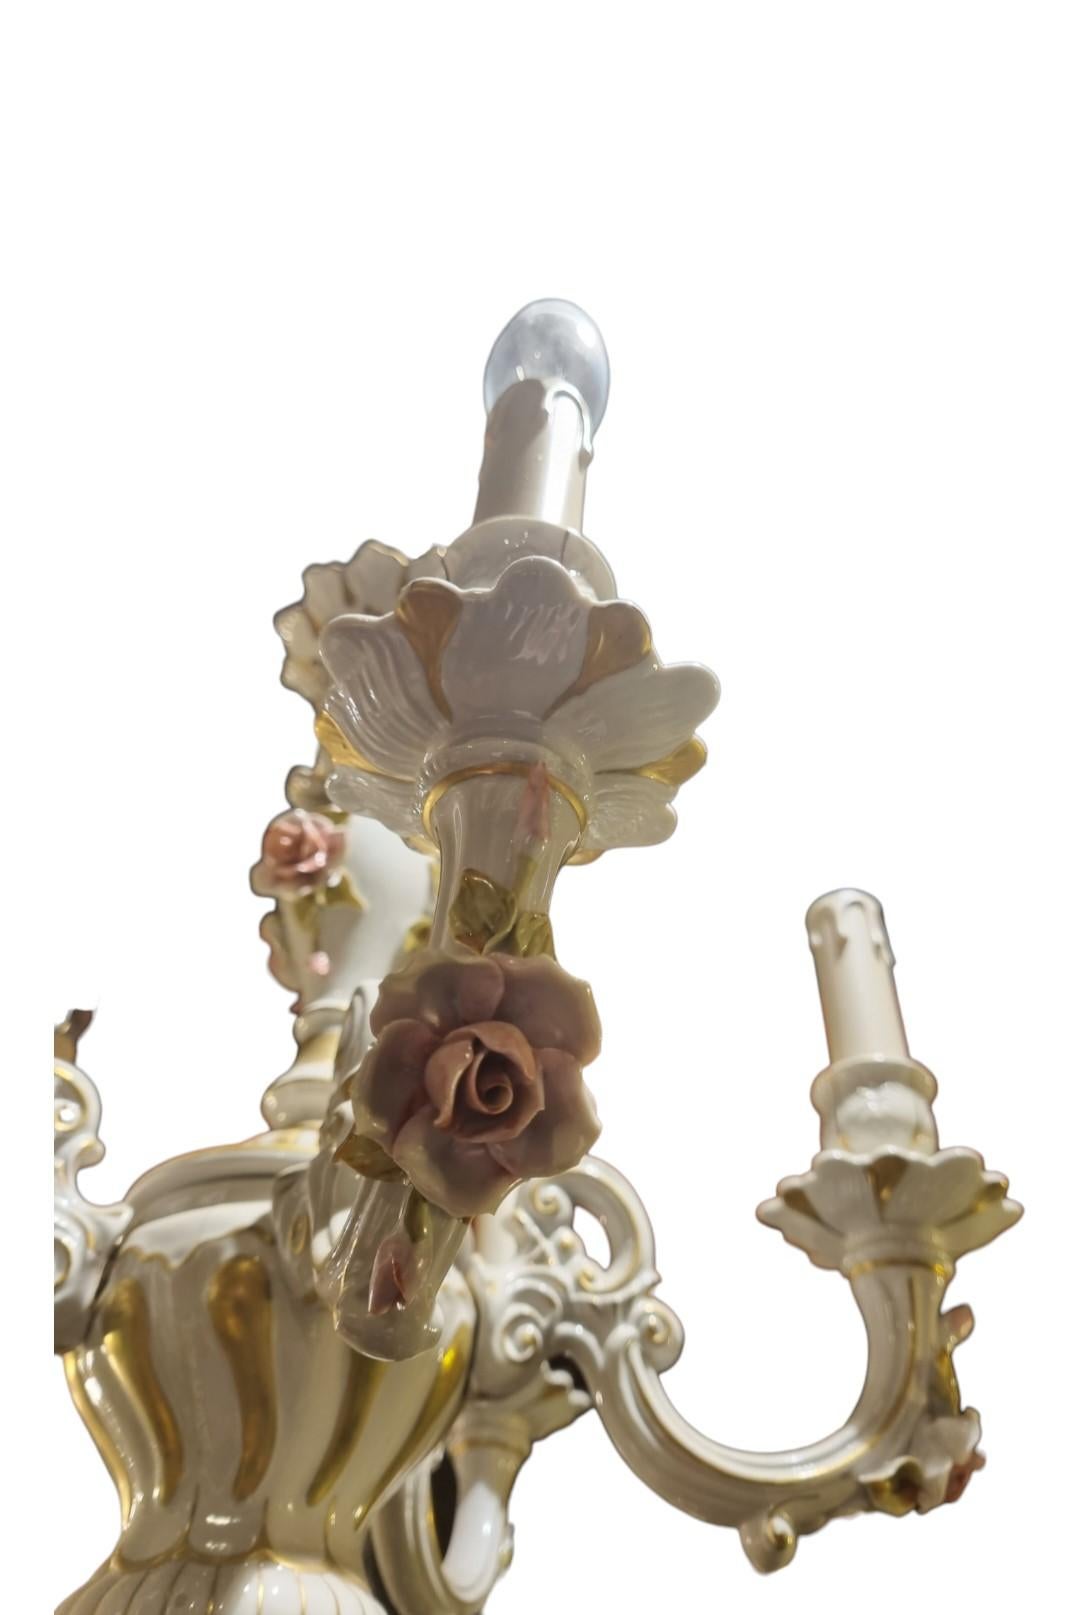 A Pretty Five Branch Capo Di Monte Chandelier
Lovely Decoration with Porcelain Flowers and Gilt Decoration,
This Chandelier Dates C1950s and Has Been Rewired and Ready to Hang